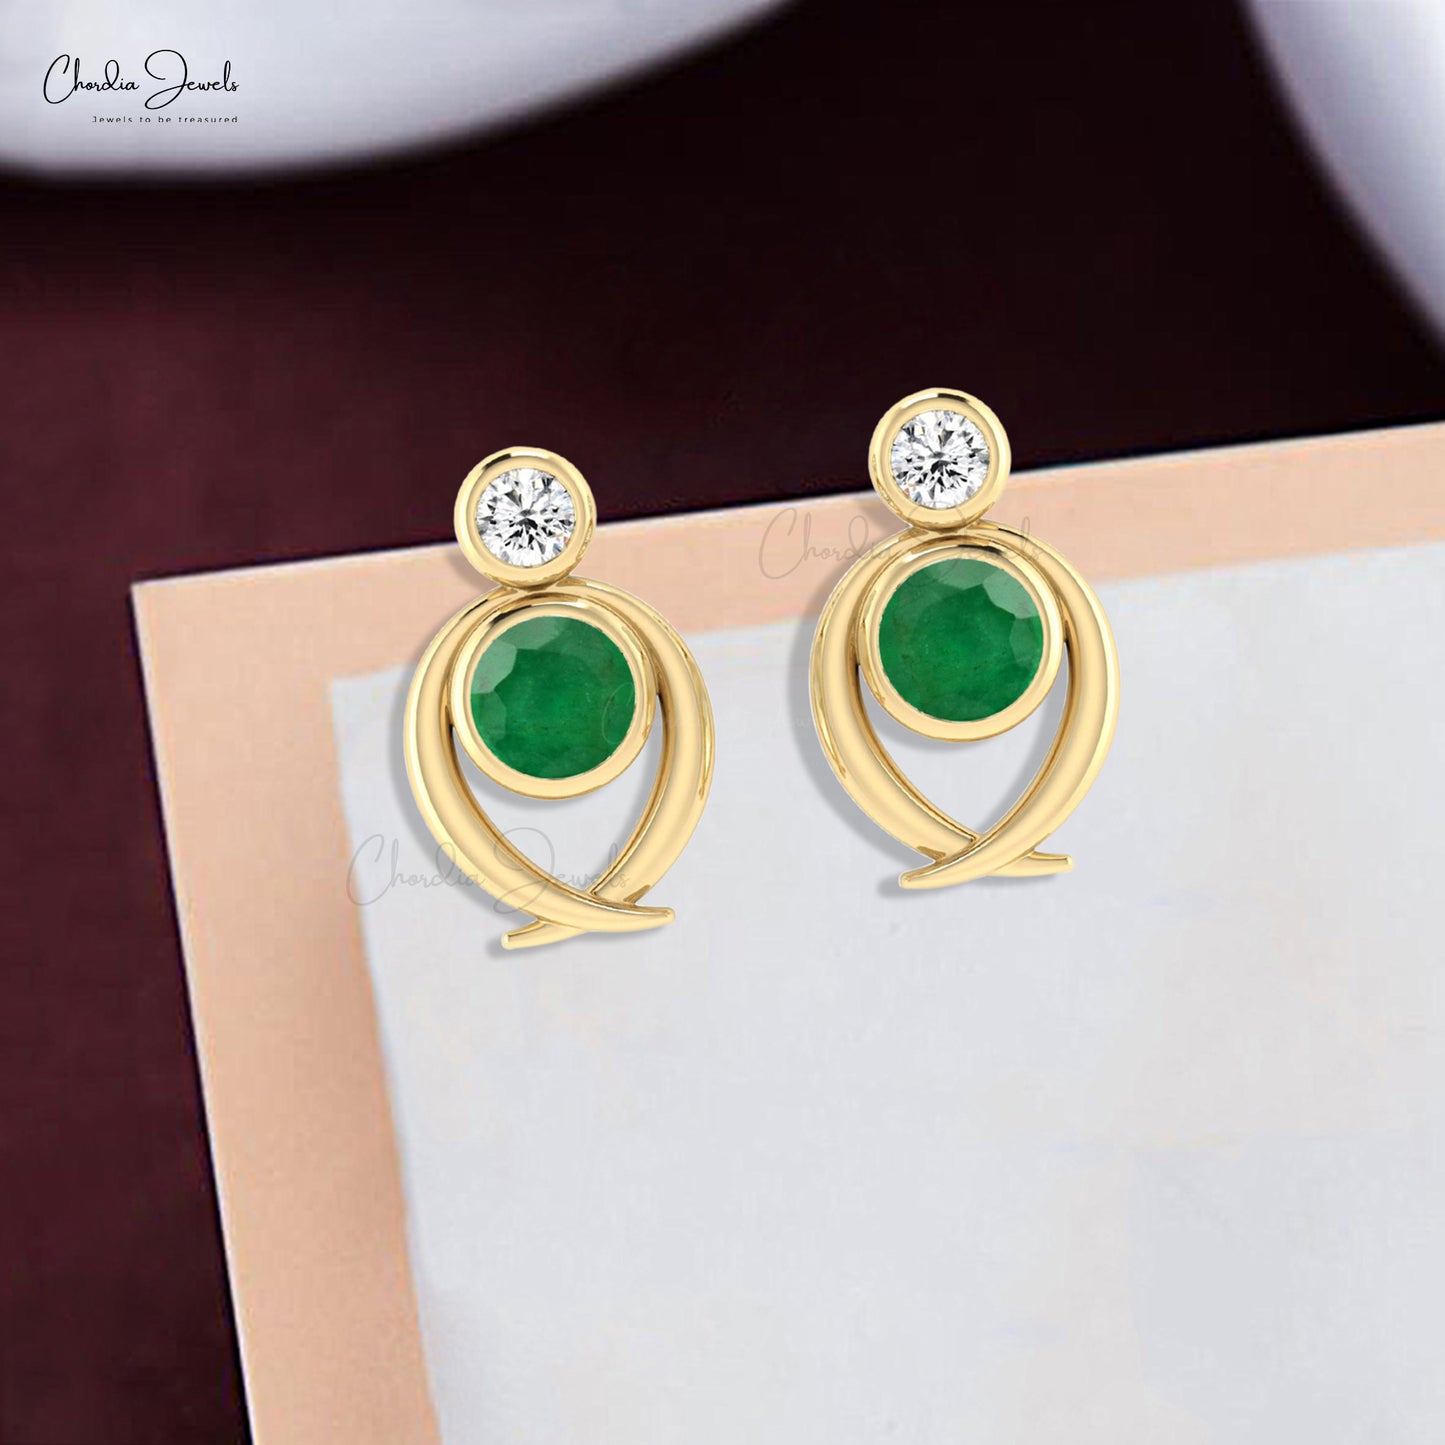 Adorn your ears with emerald stud earrings. 